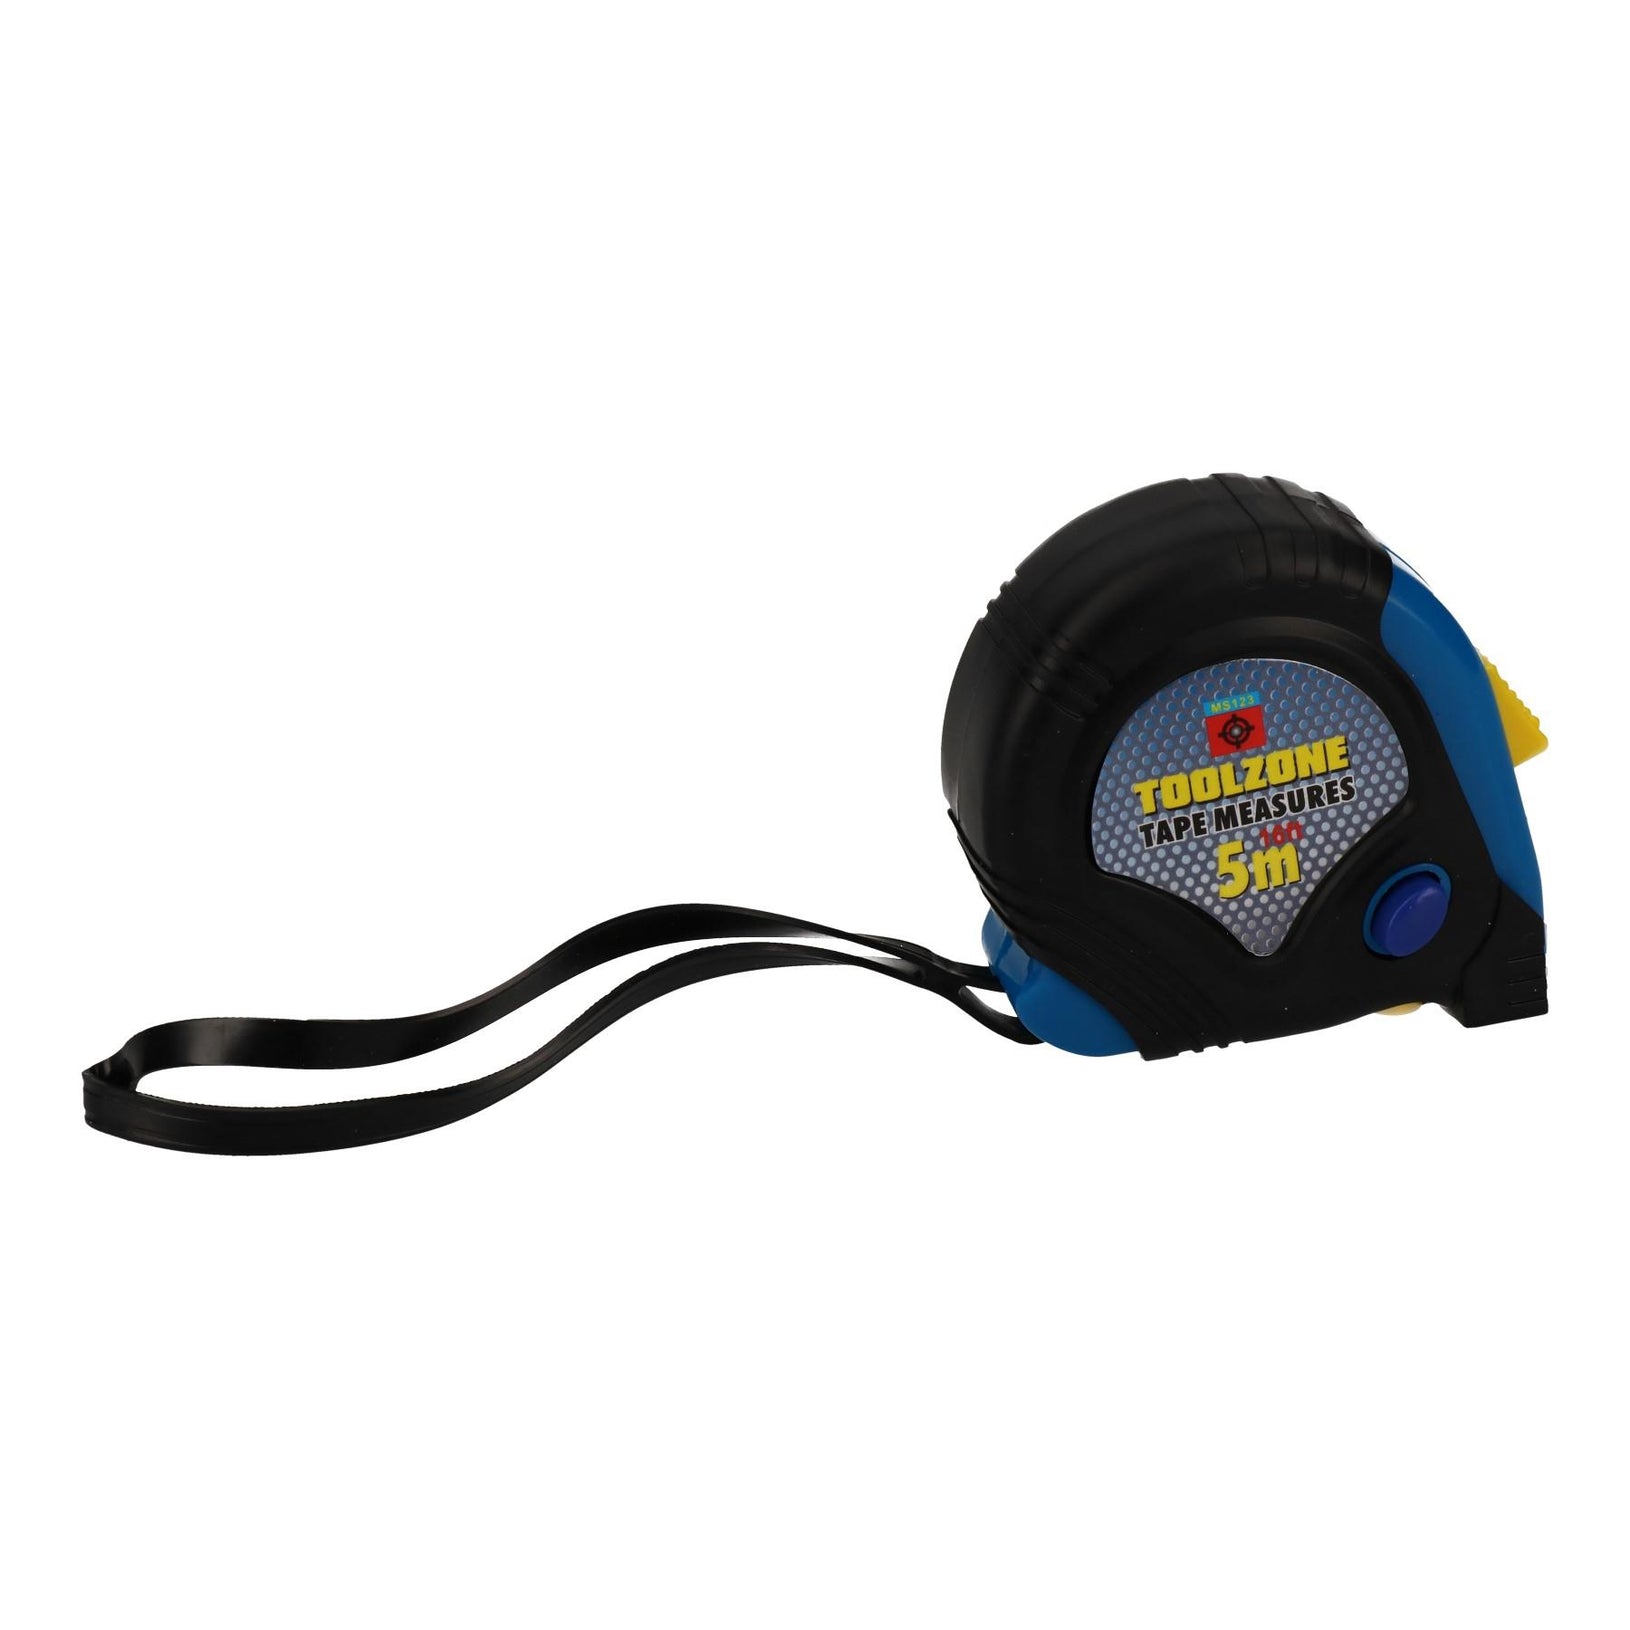 5M 19Mm R/Coated Tape Measure Metric and Imperial Markings Thickness 0.1mm